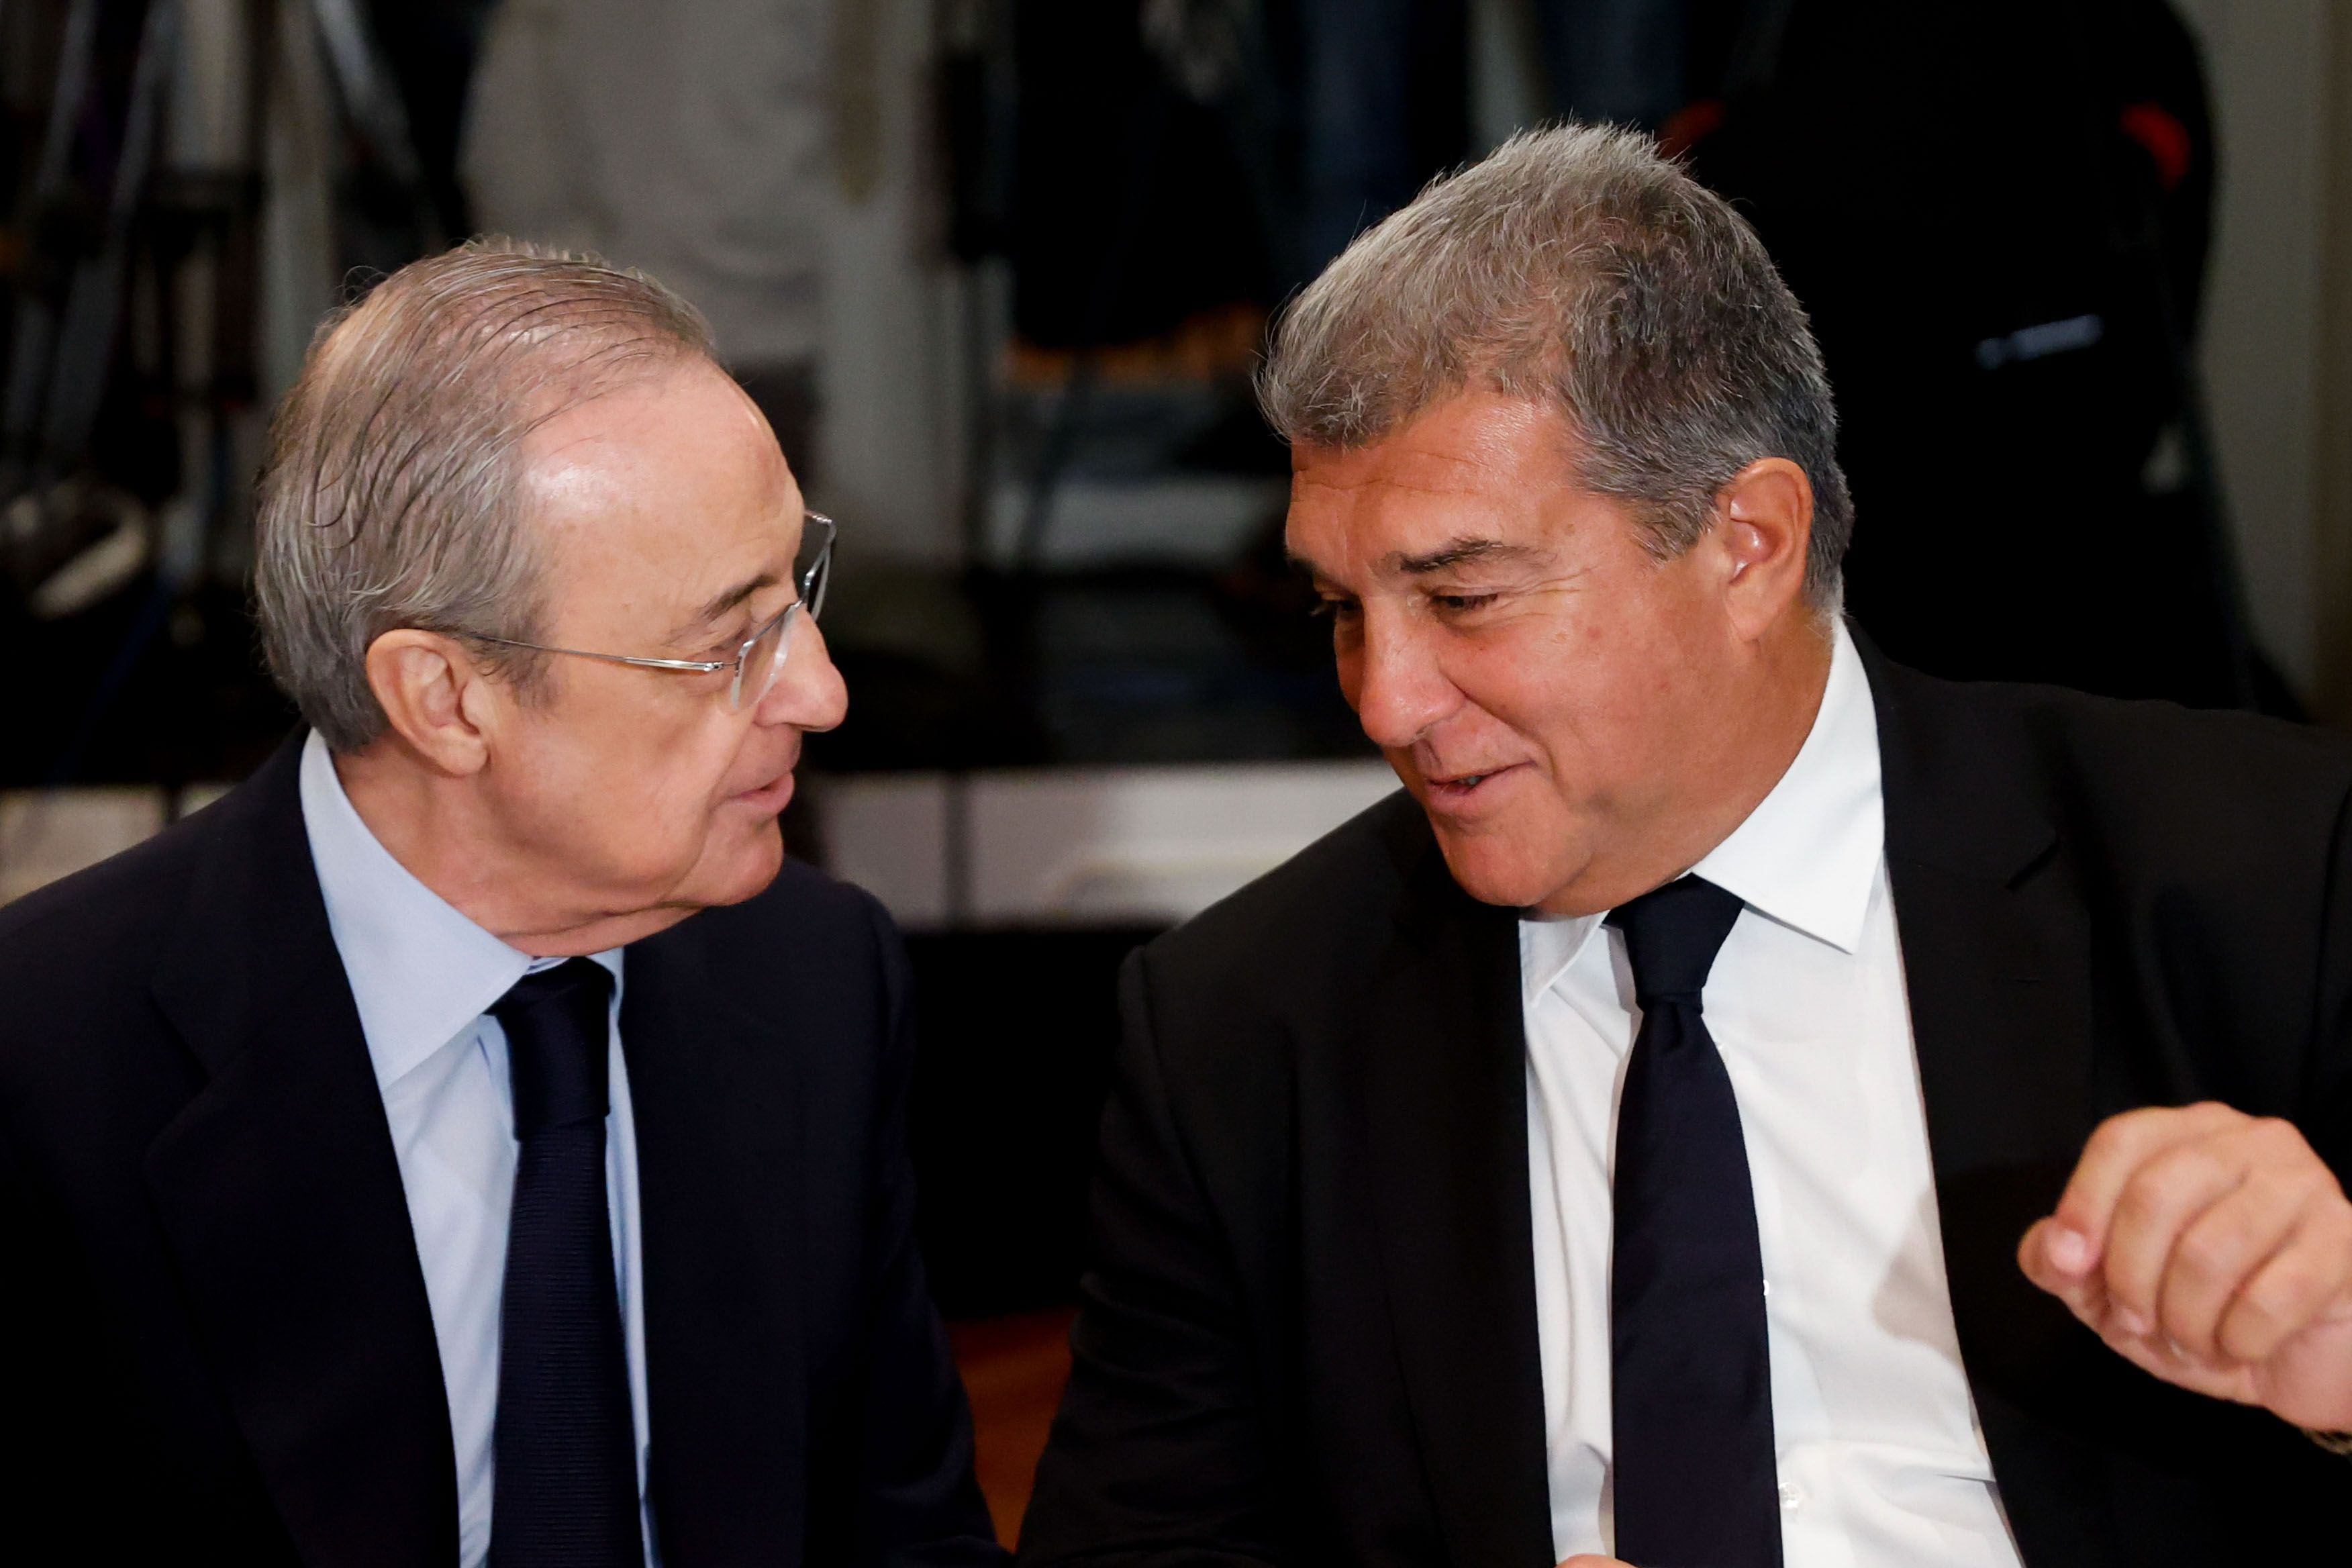 Real Madrid president Florentino Pérez not expected to attend El Clásico